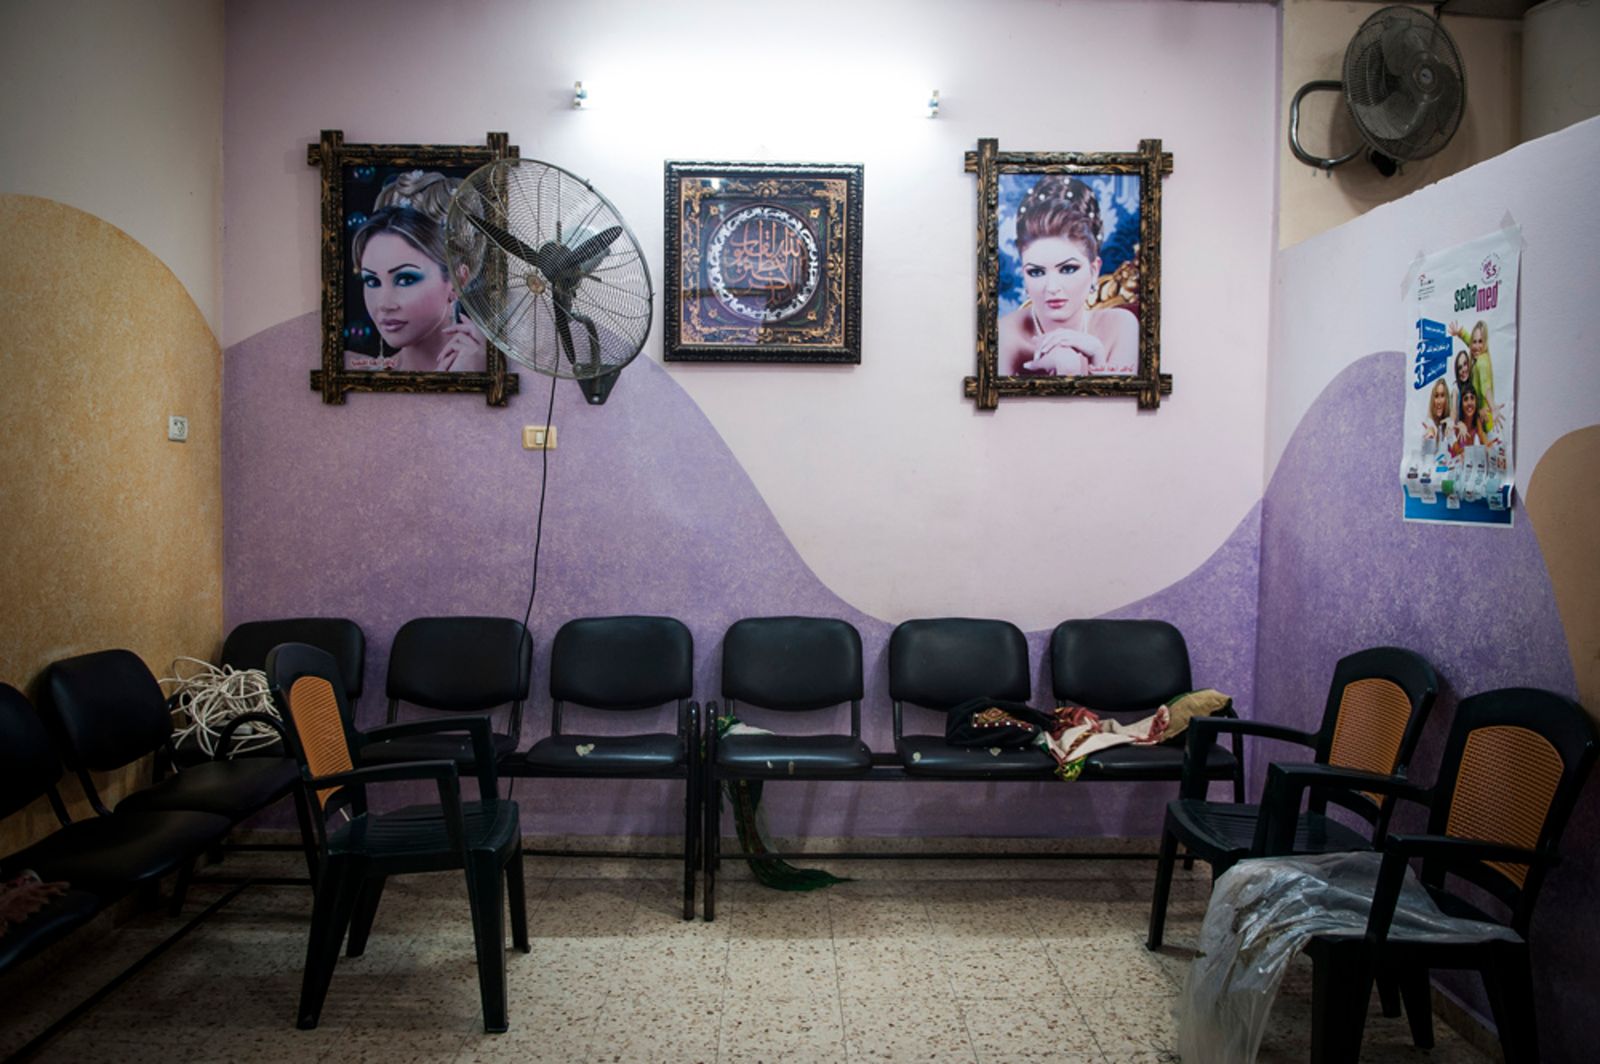 © Monique Jaques - Image from the Gaza Girls: growing up in the gaza strip photography project